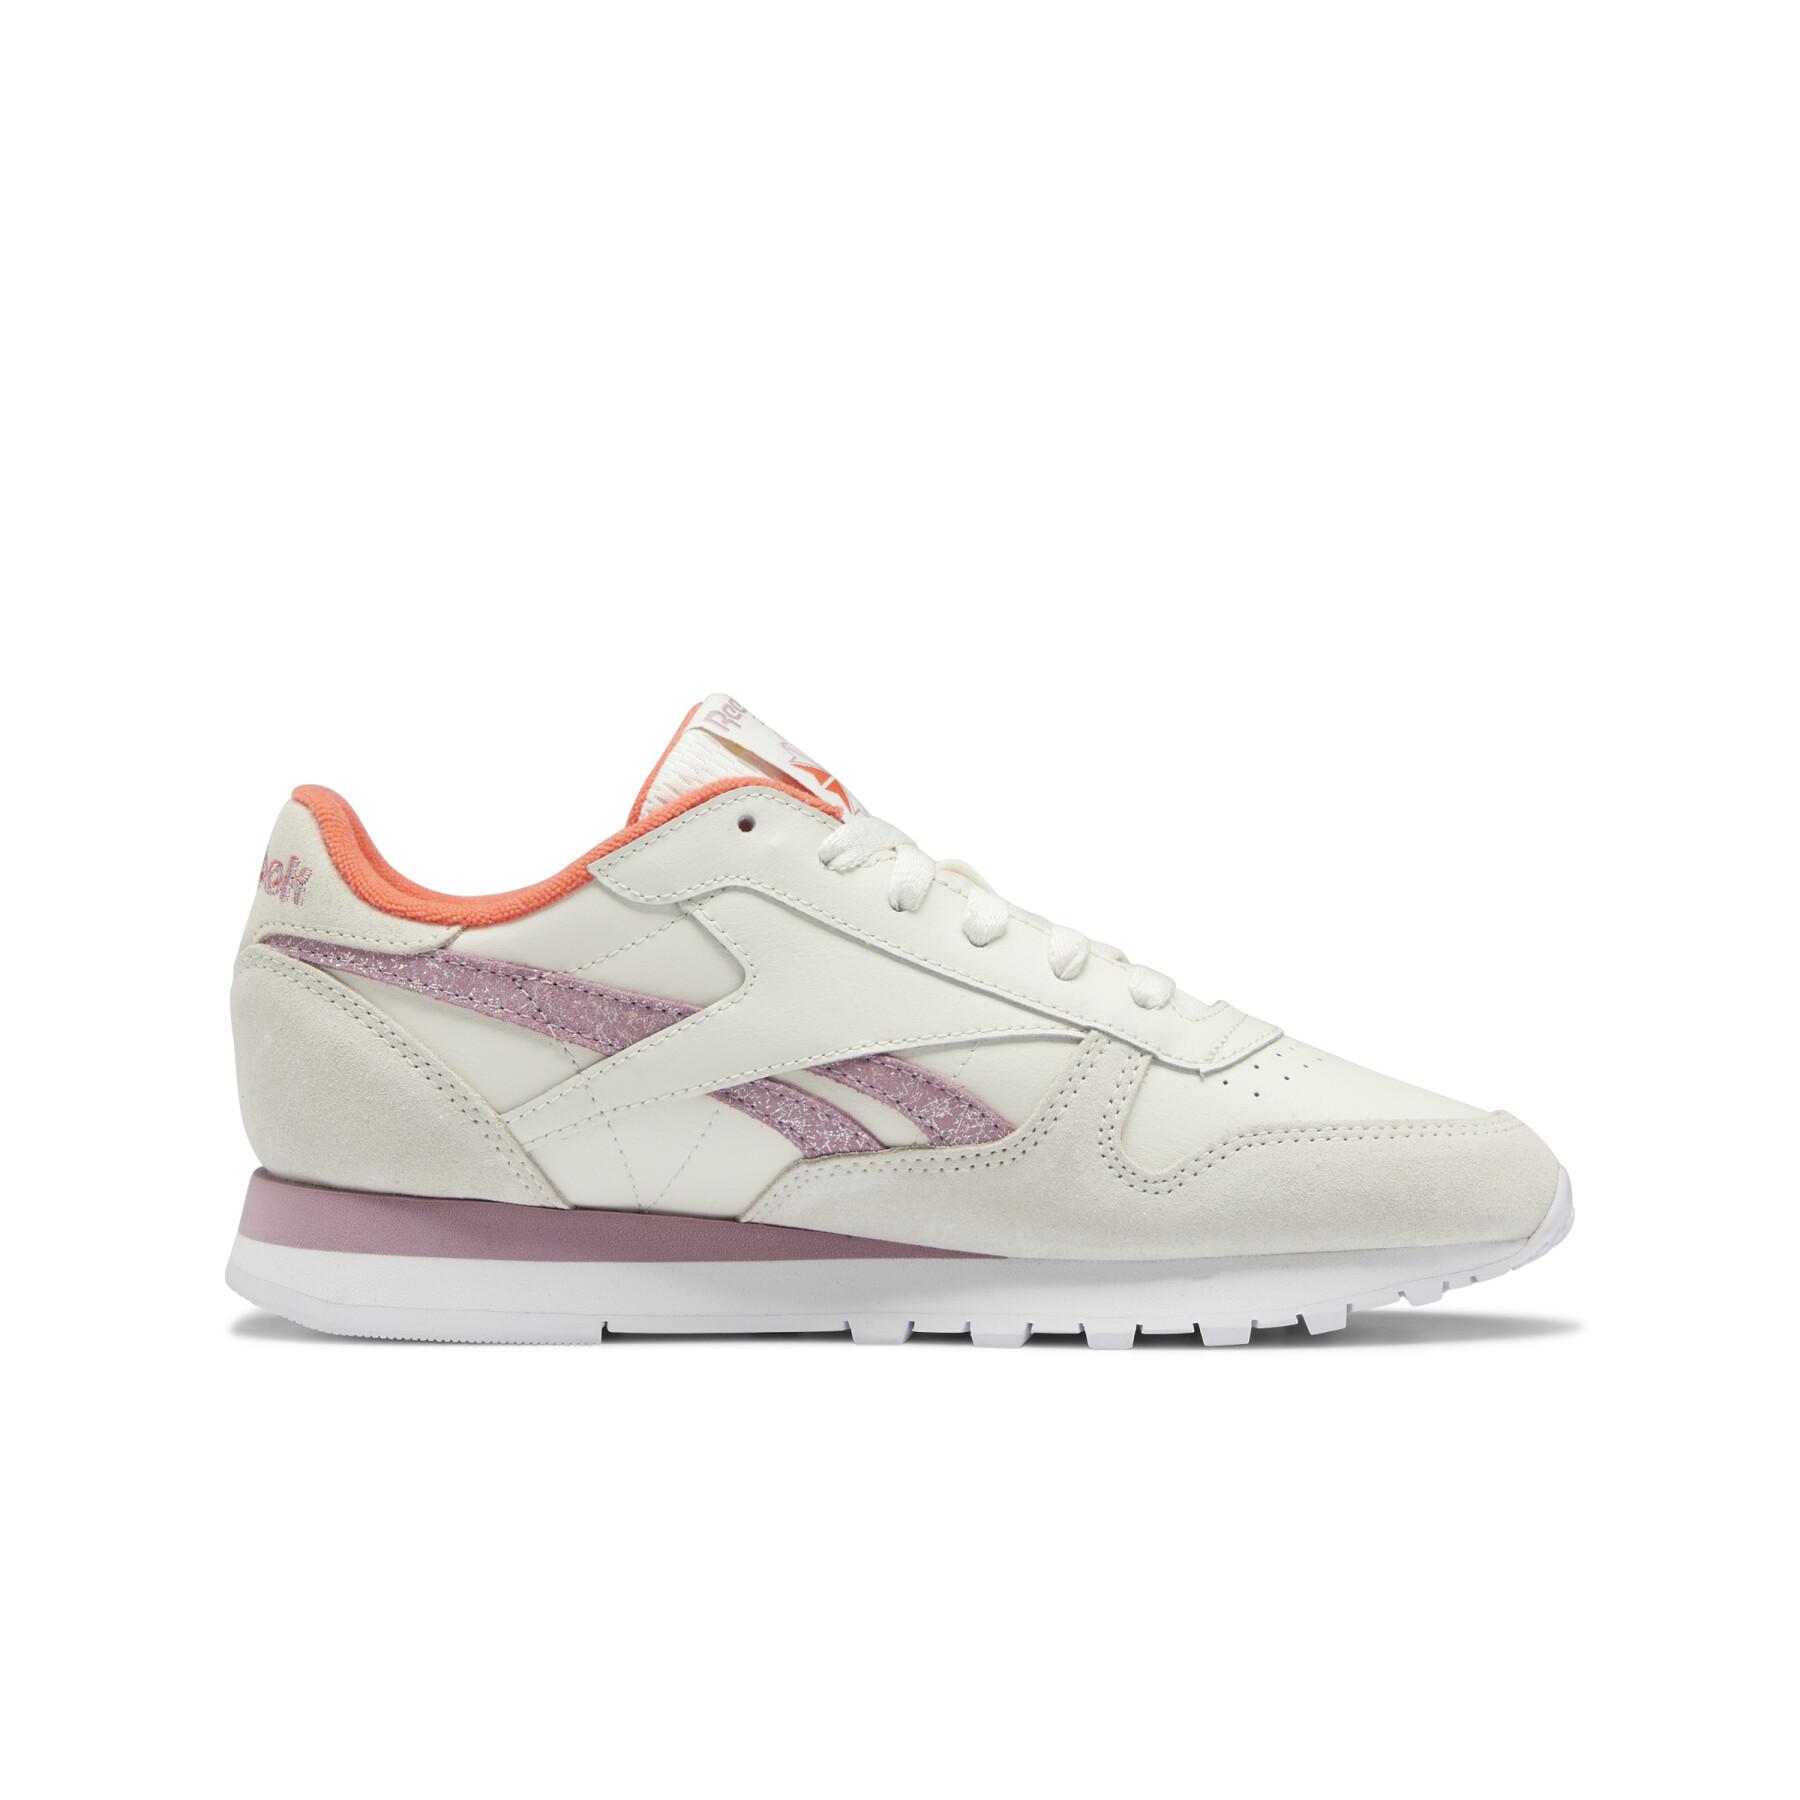 Leather sneakers for women Reebok Classic - Brands - Lifestyle